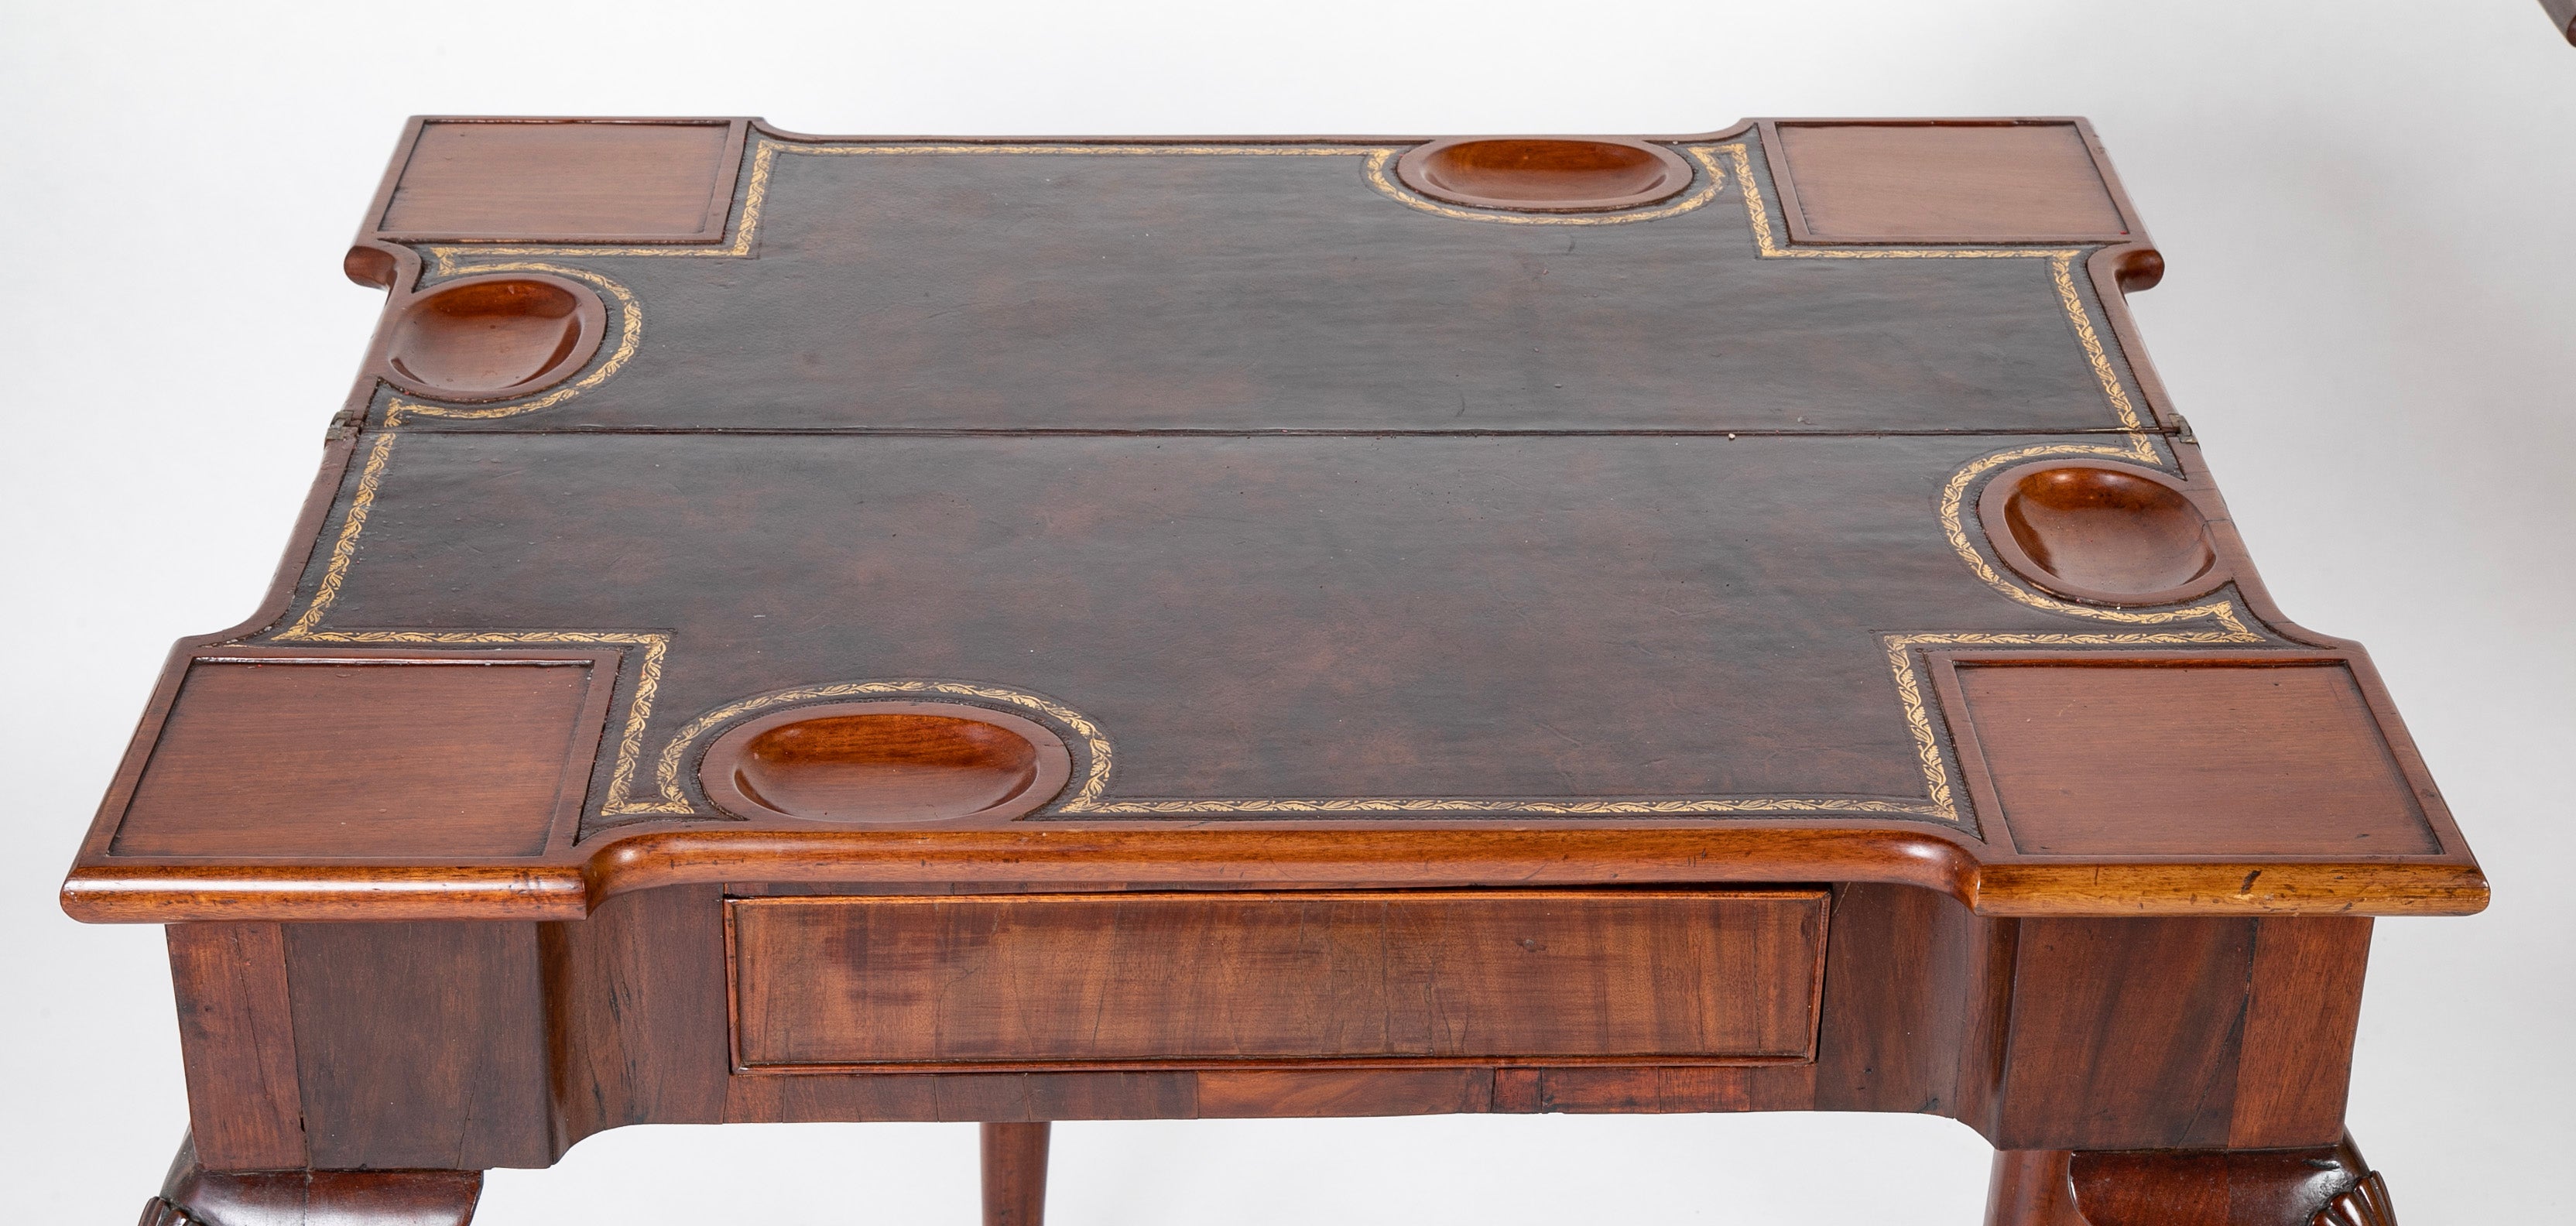 Rare and Important Pair of English George II Period Games Tables